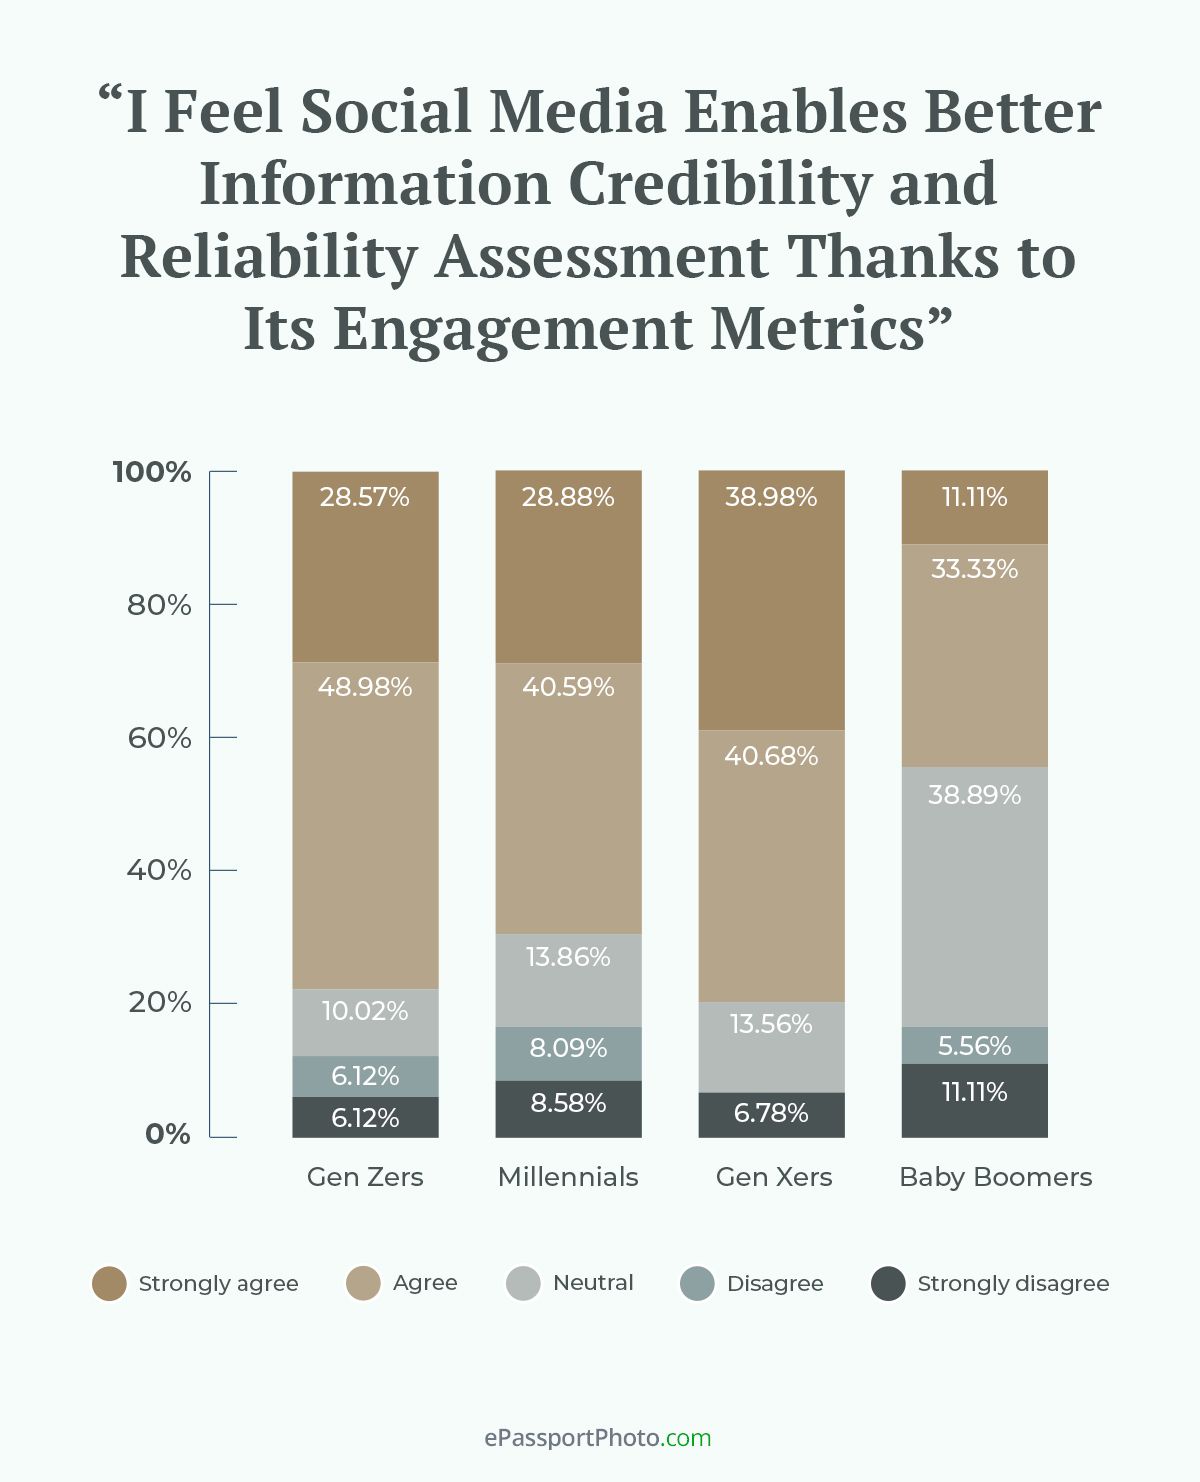 an average of 67.78% agree or strongly agree they can get a better sense of the credibility and reliability of the information on social media